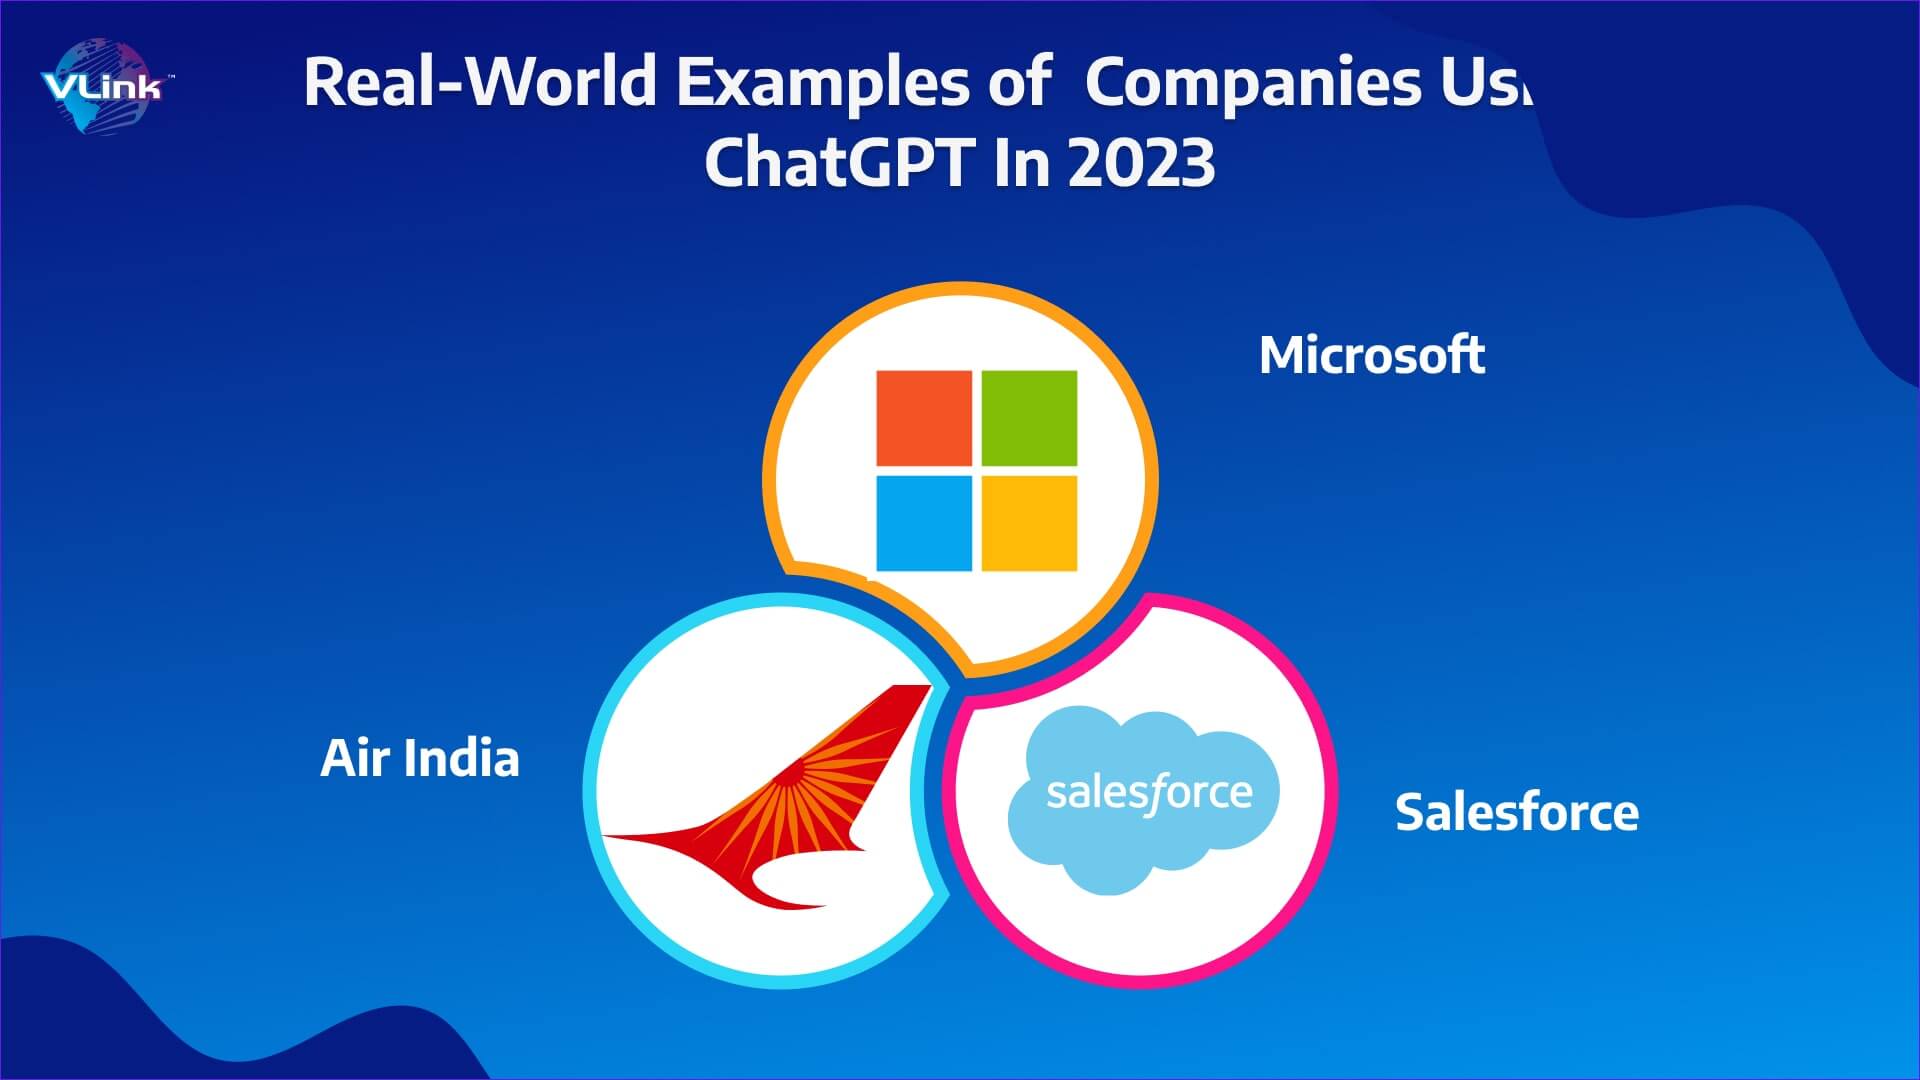 Real-world examples of companies us chatgpt in 2023